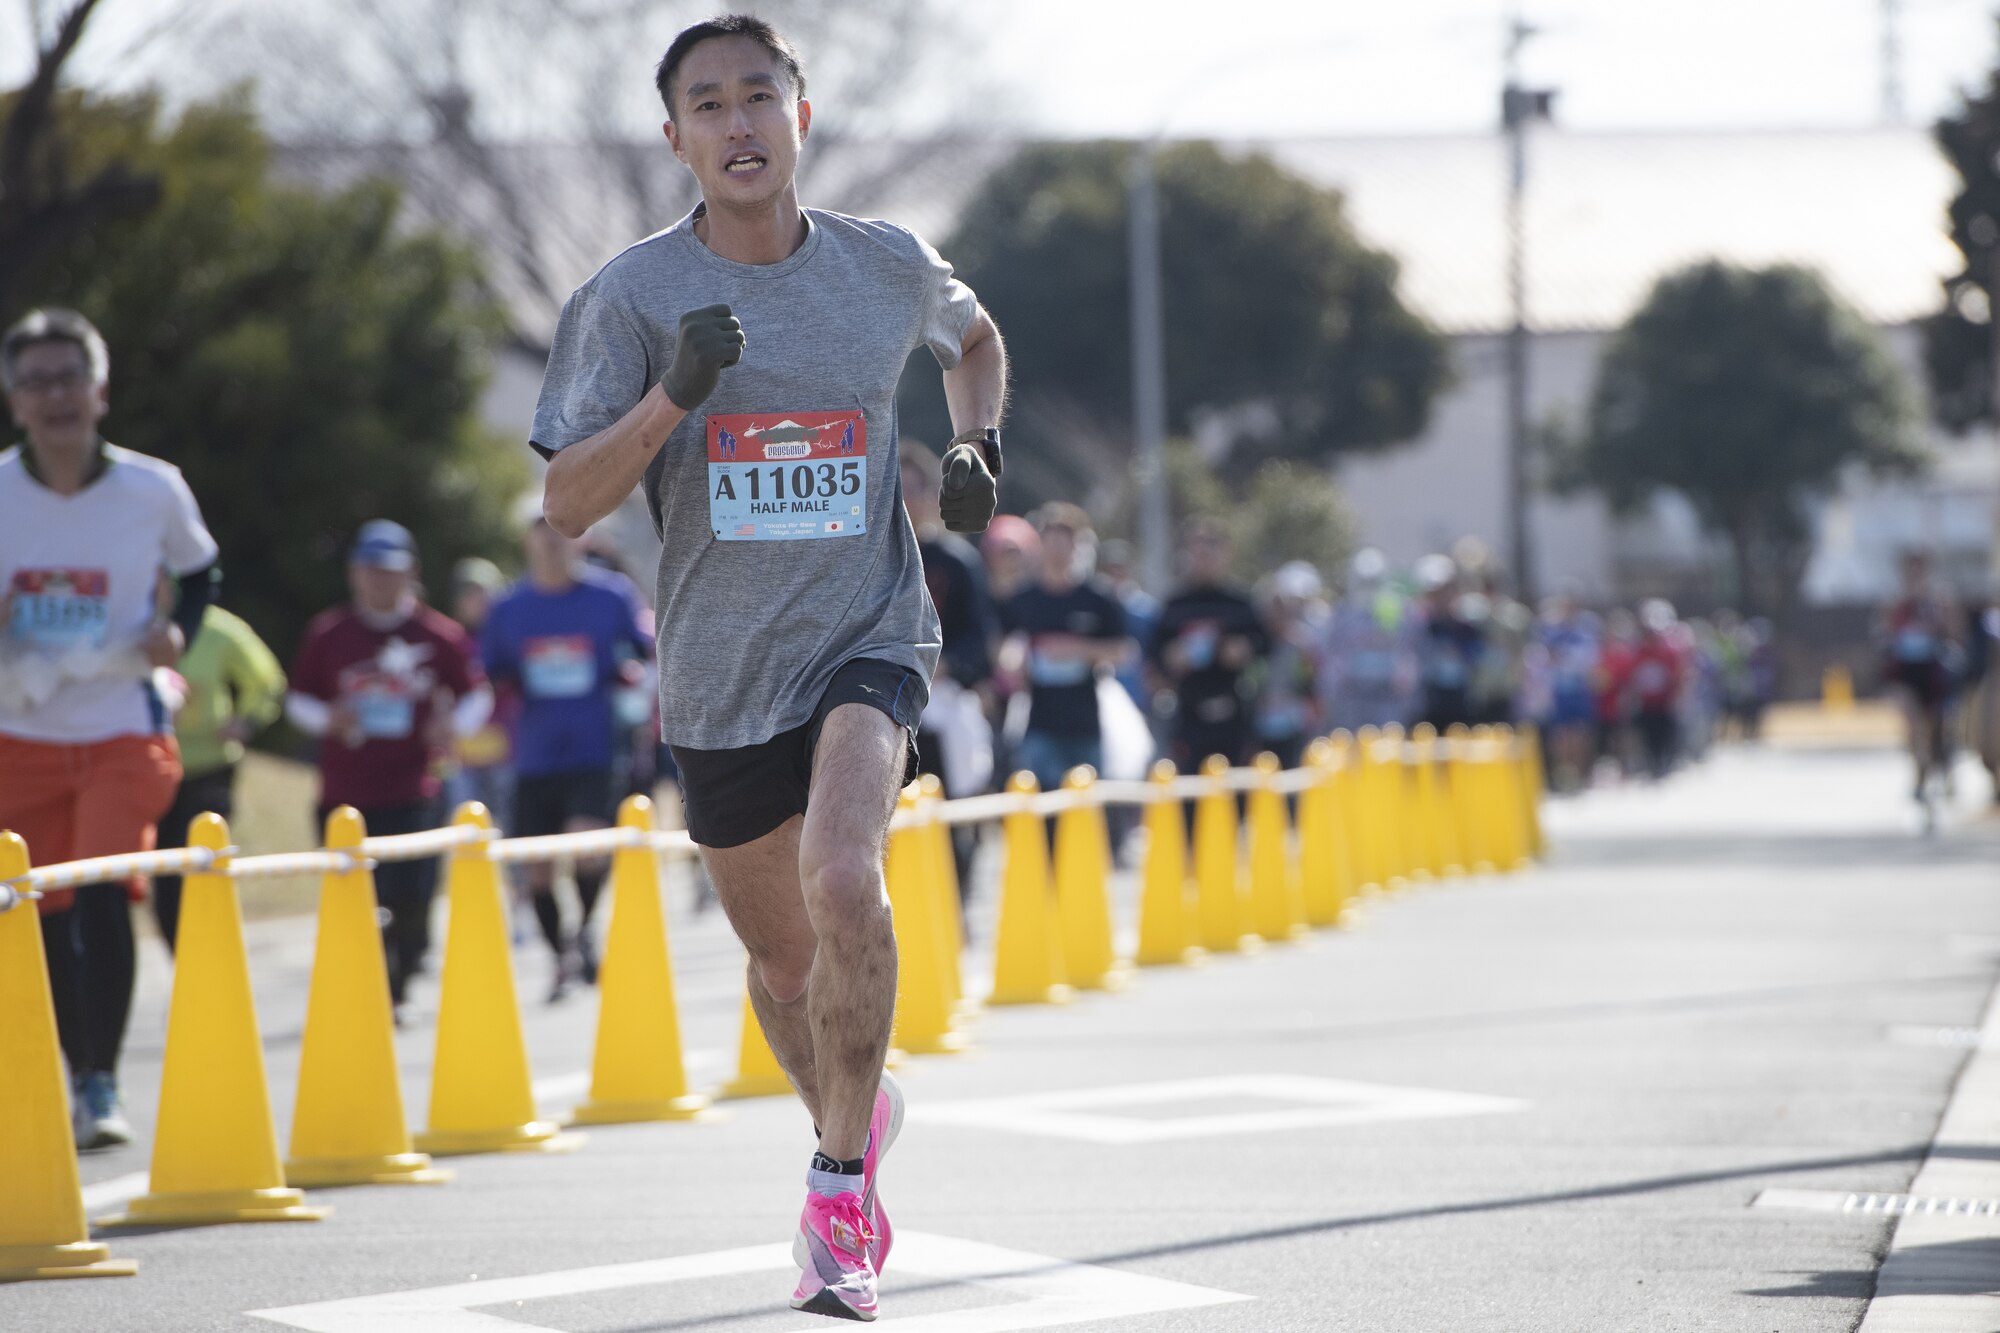 Naoya Ito, a half-marathon race participant, sprints towards the finish line during the 42nd annual Frostbite Road Race.